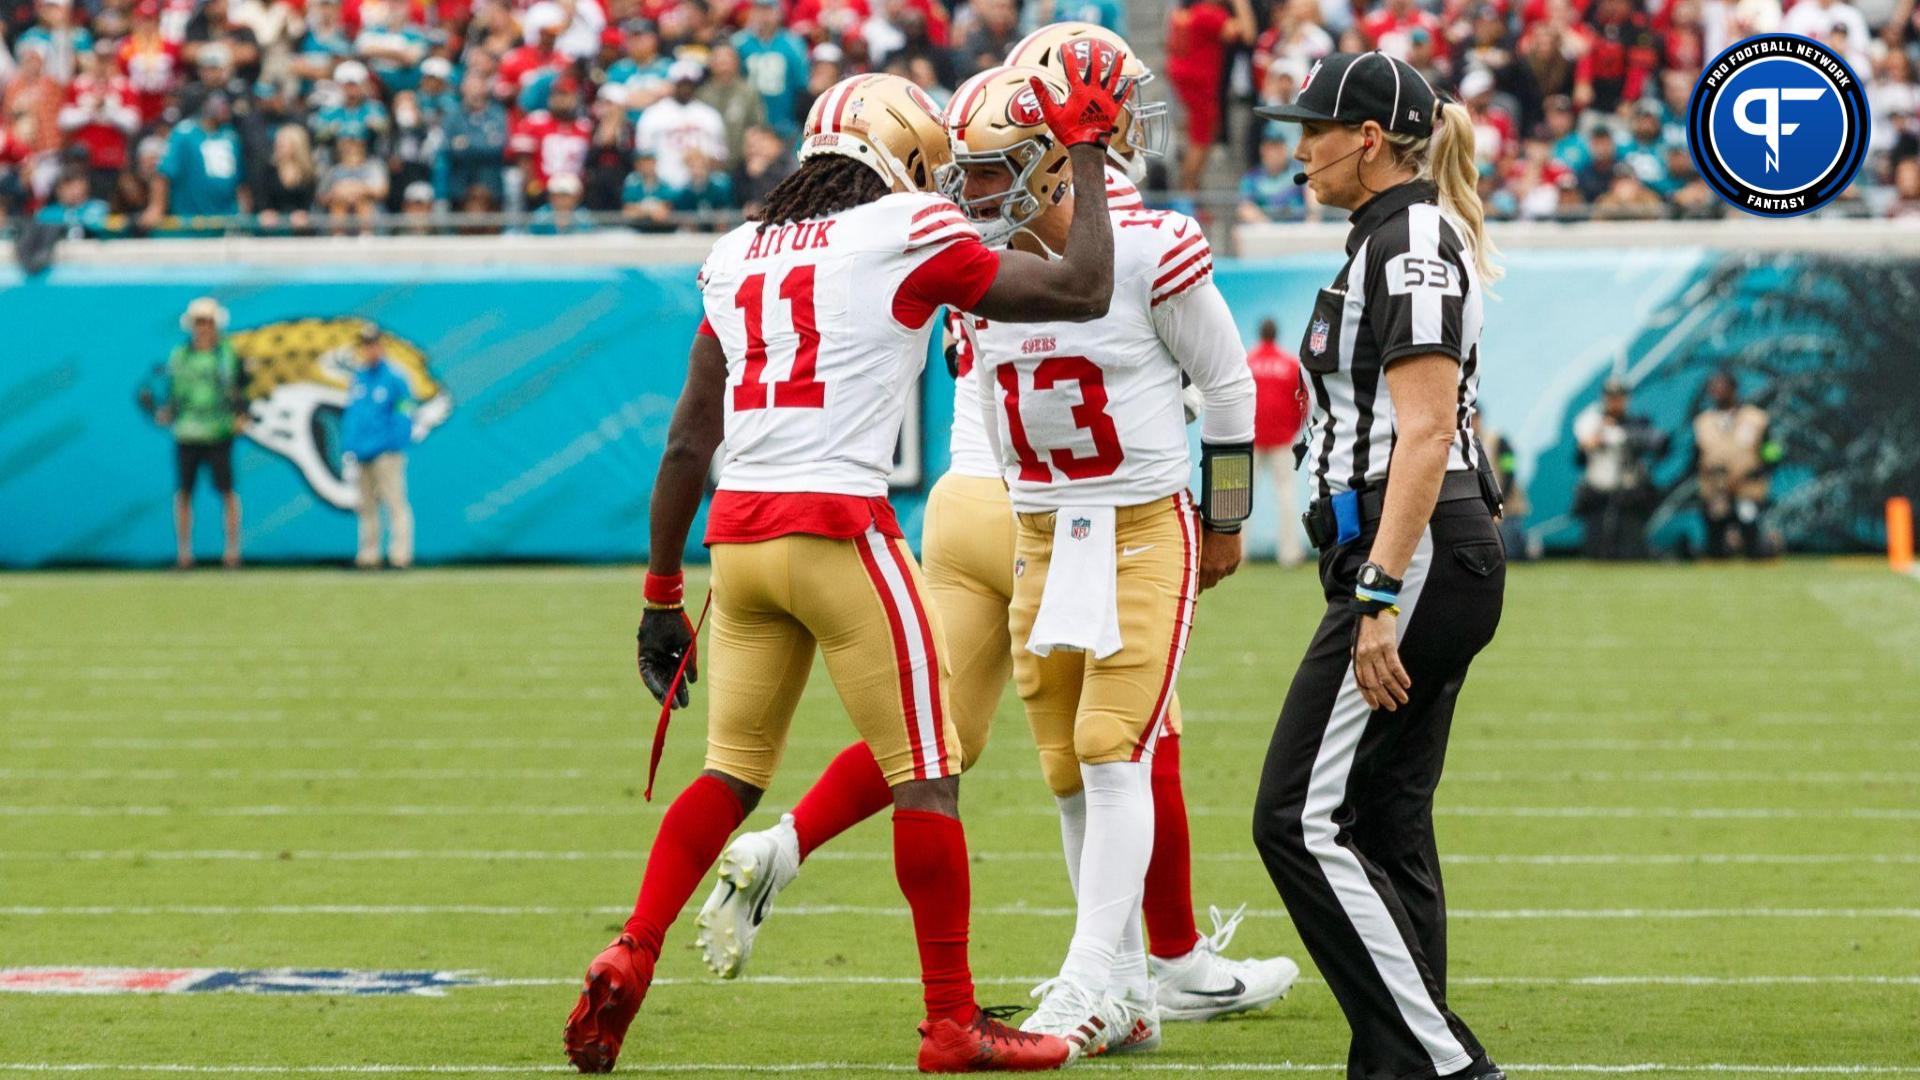 San Francisco 49ers wide receiver Brandon Aiyuk (11) and quarterback Brock Purdy (13) celebrate a touchdown against the Jacksonville Jaguars during the first quarter at EverBank Stadium.